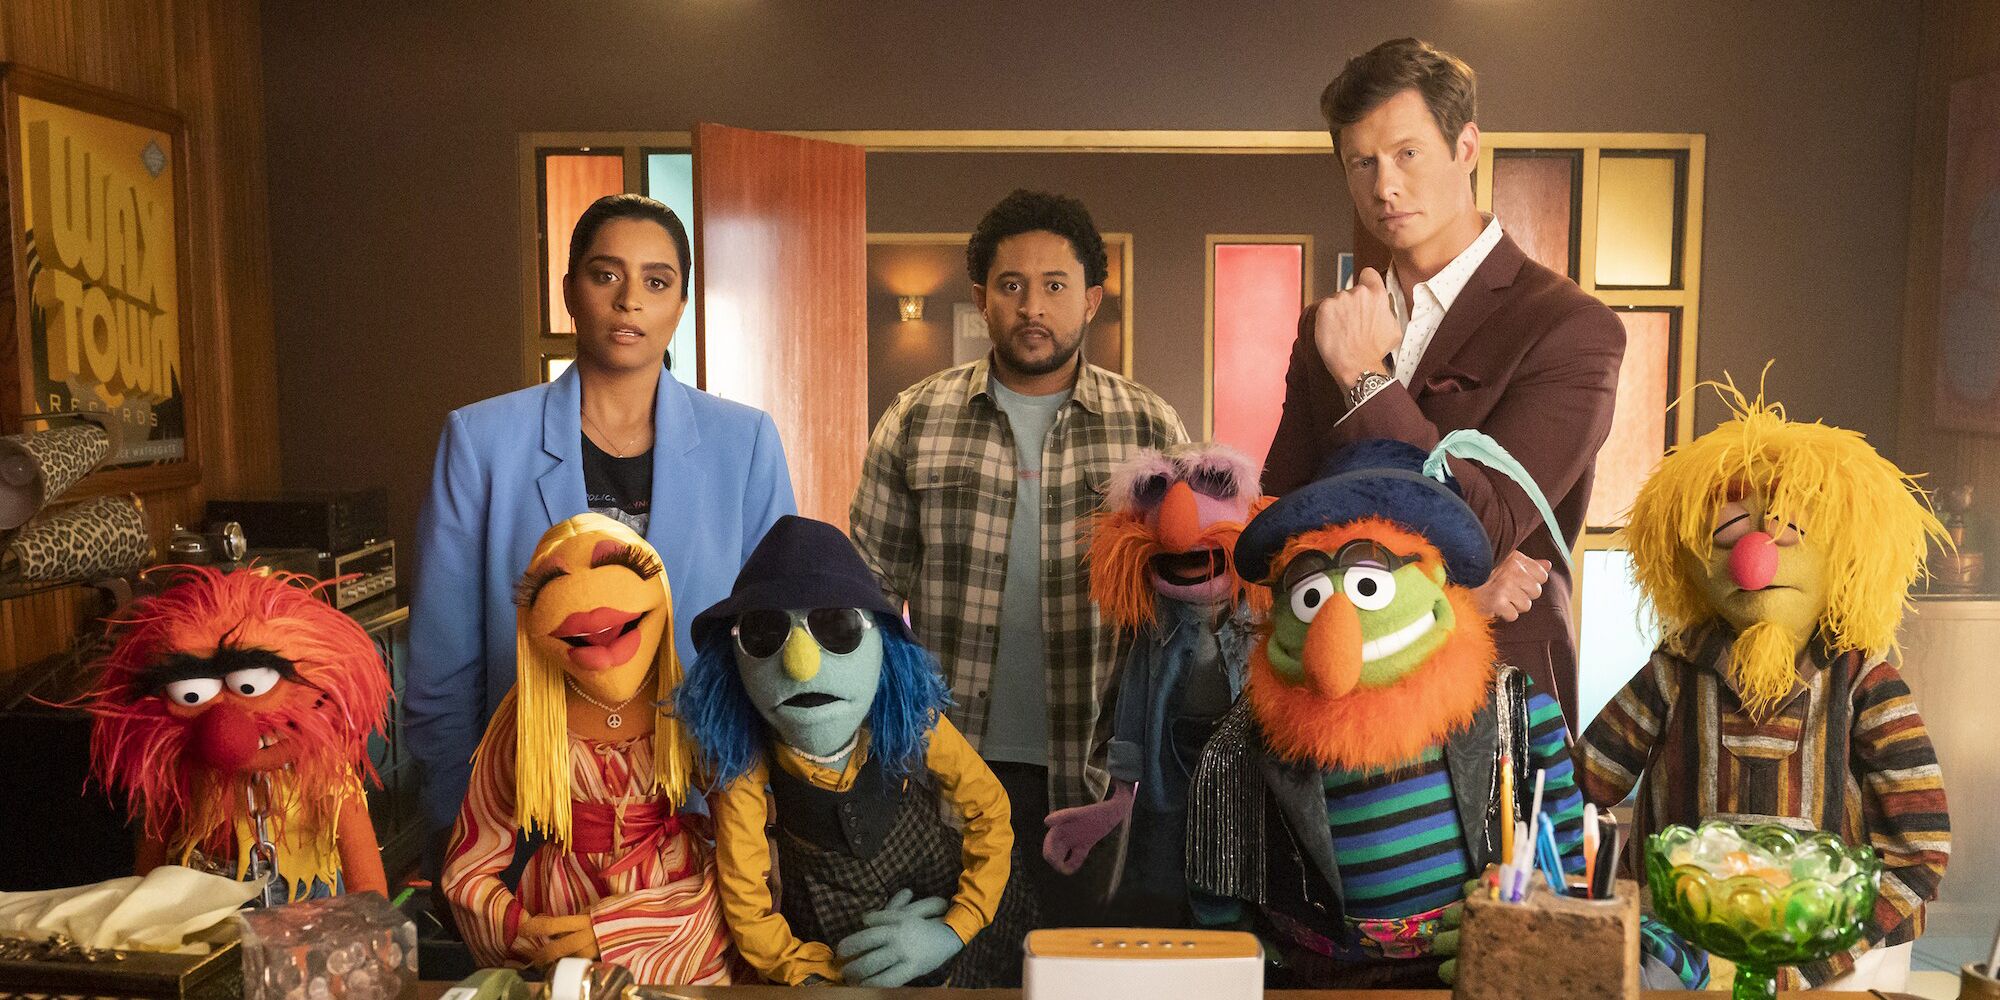 The cast -- human and Muppet alike -- of The Muppets Mayhem